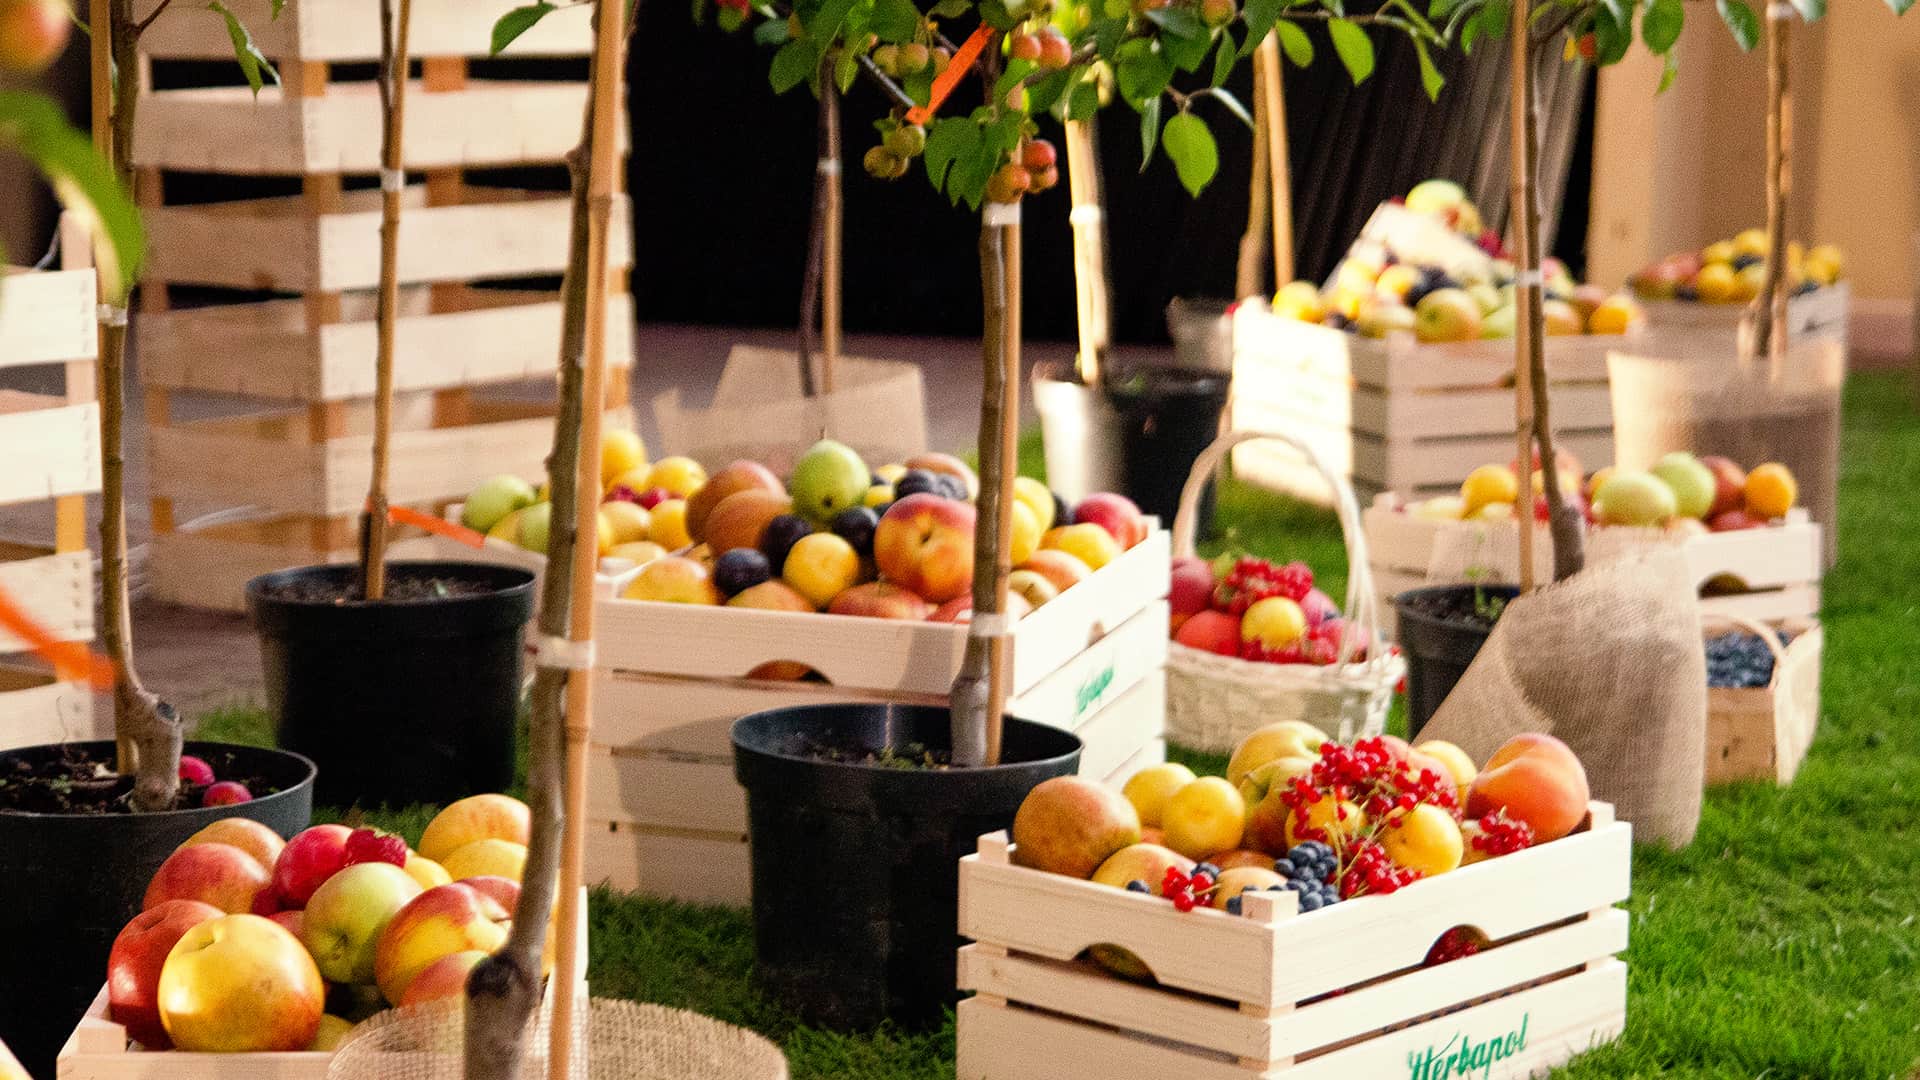 fresh fruit and vegetables in crates: apples, grapes, currants, pears and others